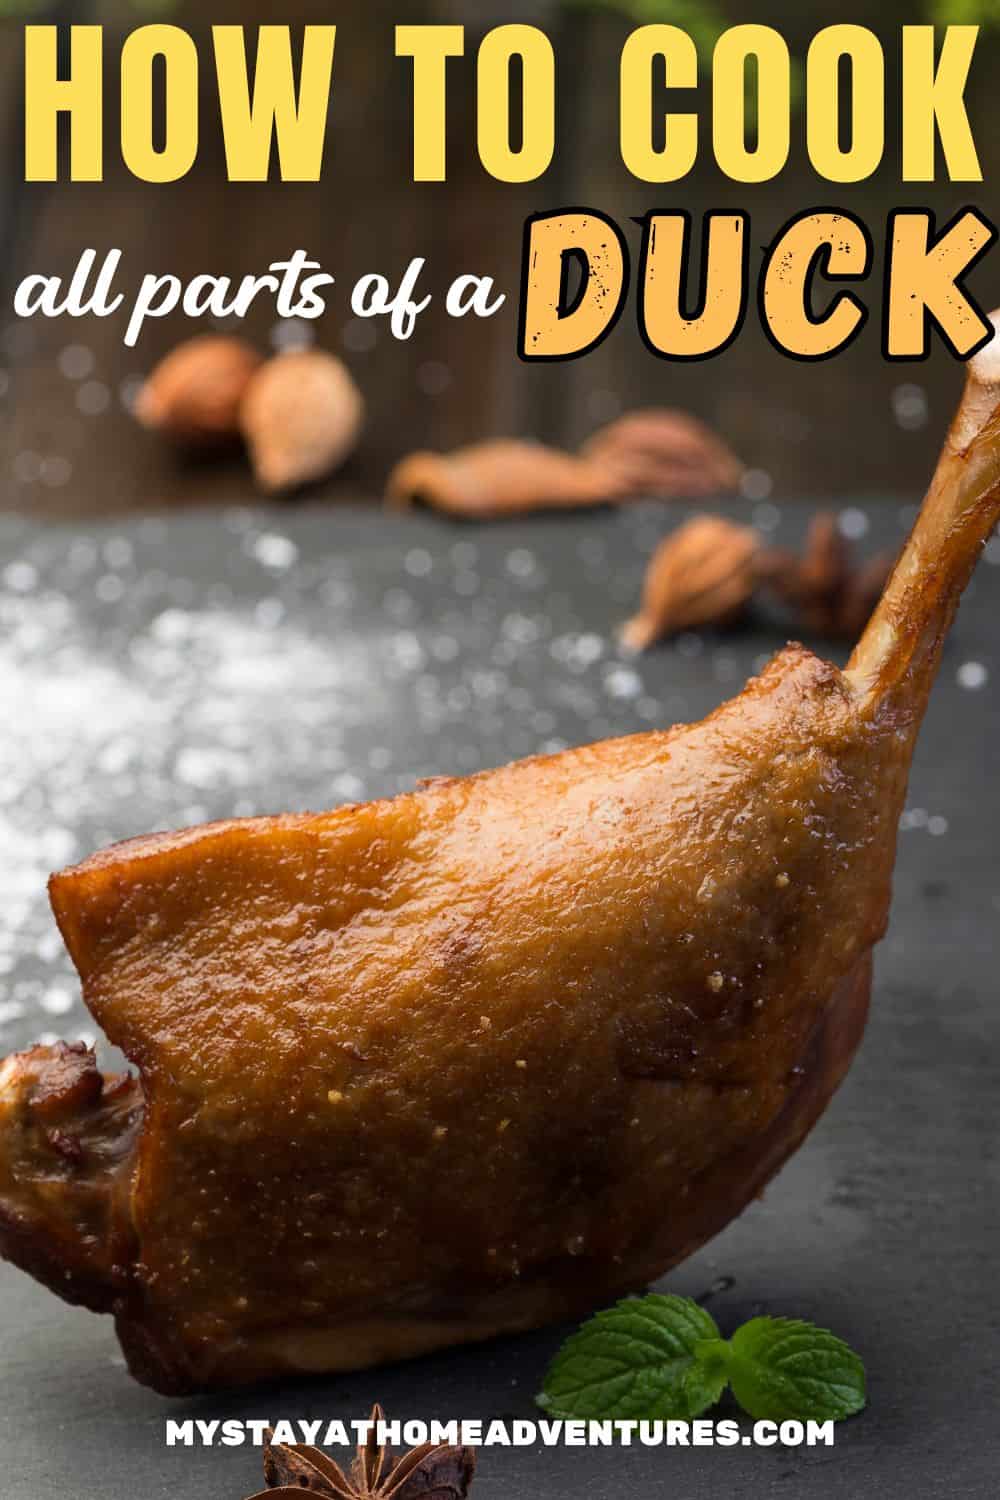 Duck legs with text: "How to Cook All Parts of a Duck"